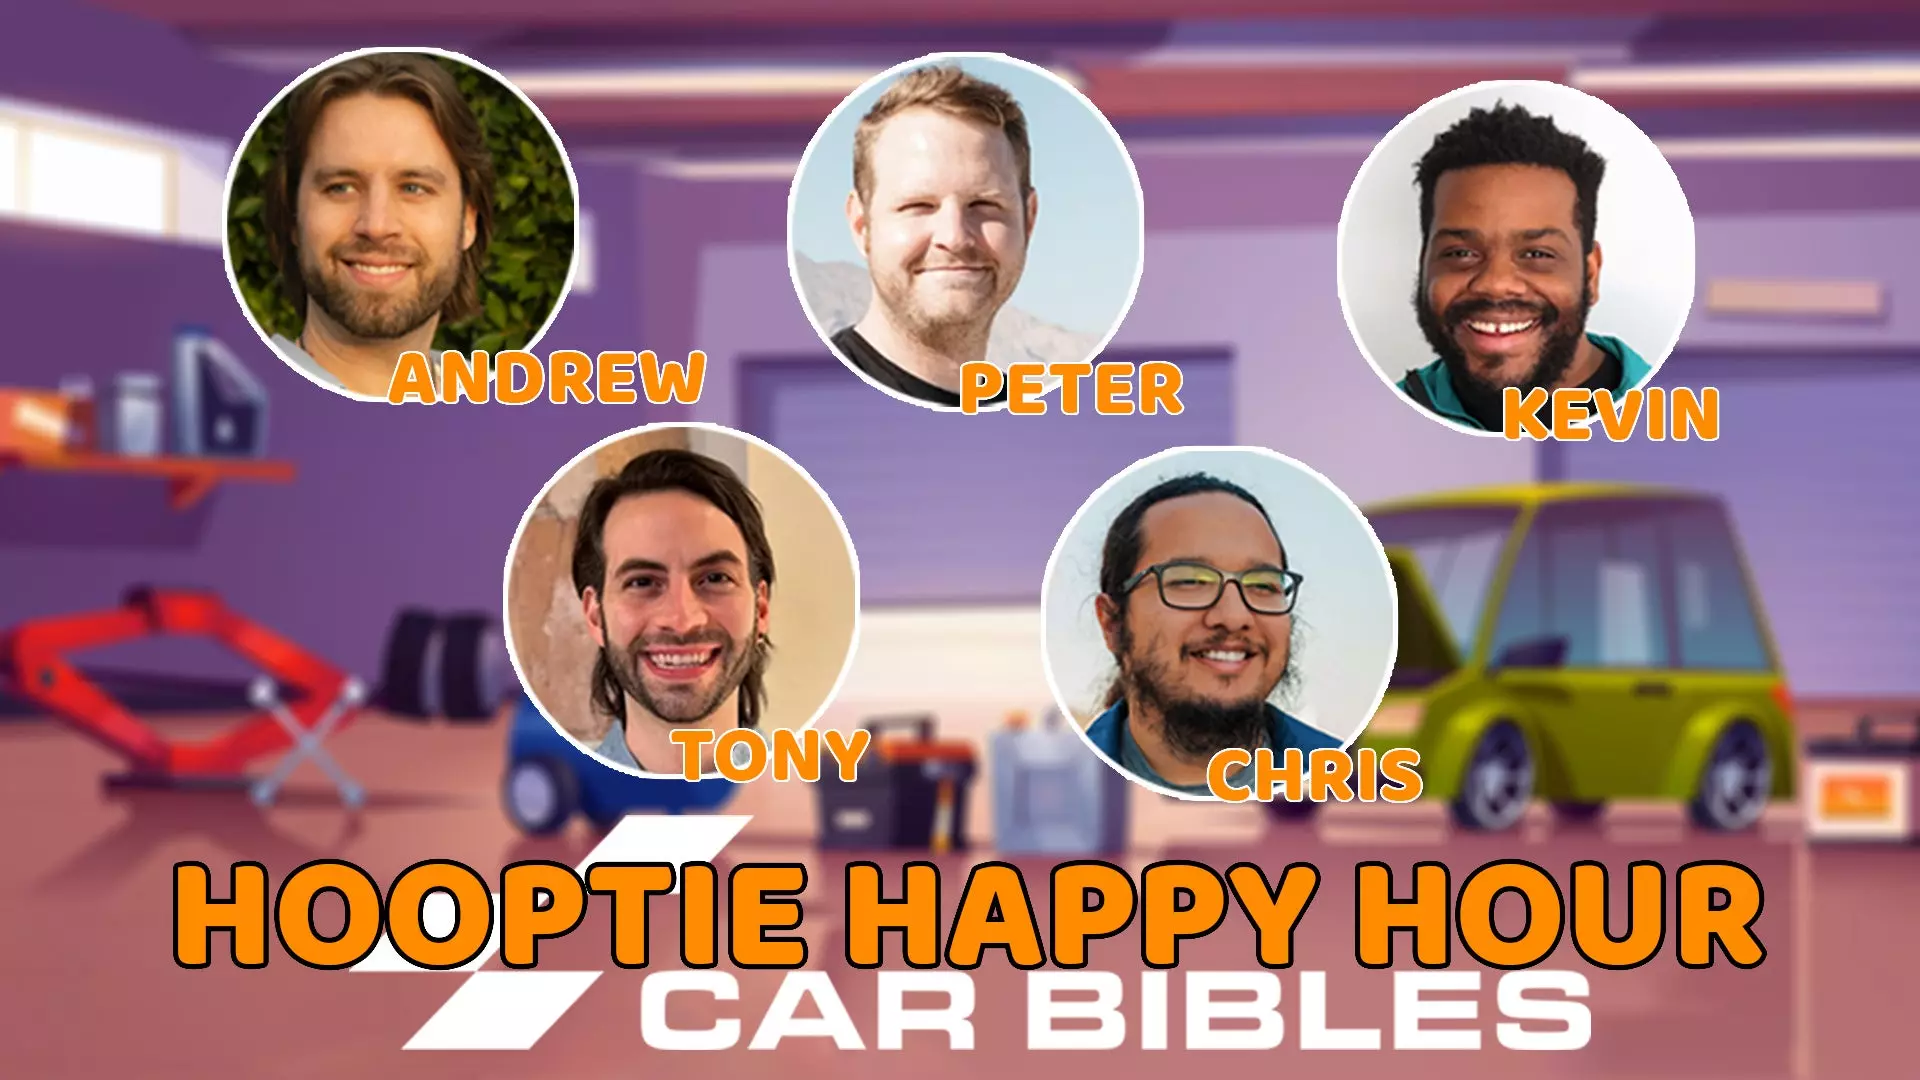 New Car Podcast Mixes Old-School Radio Show Vibes With Online Interactiveness